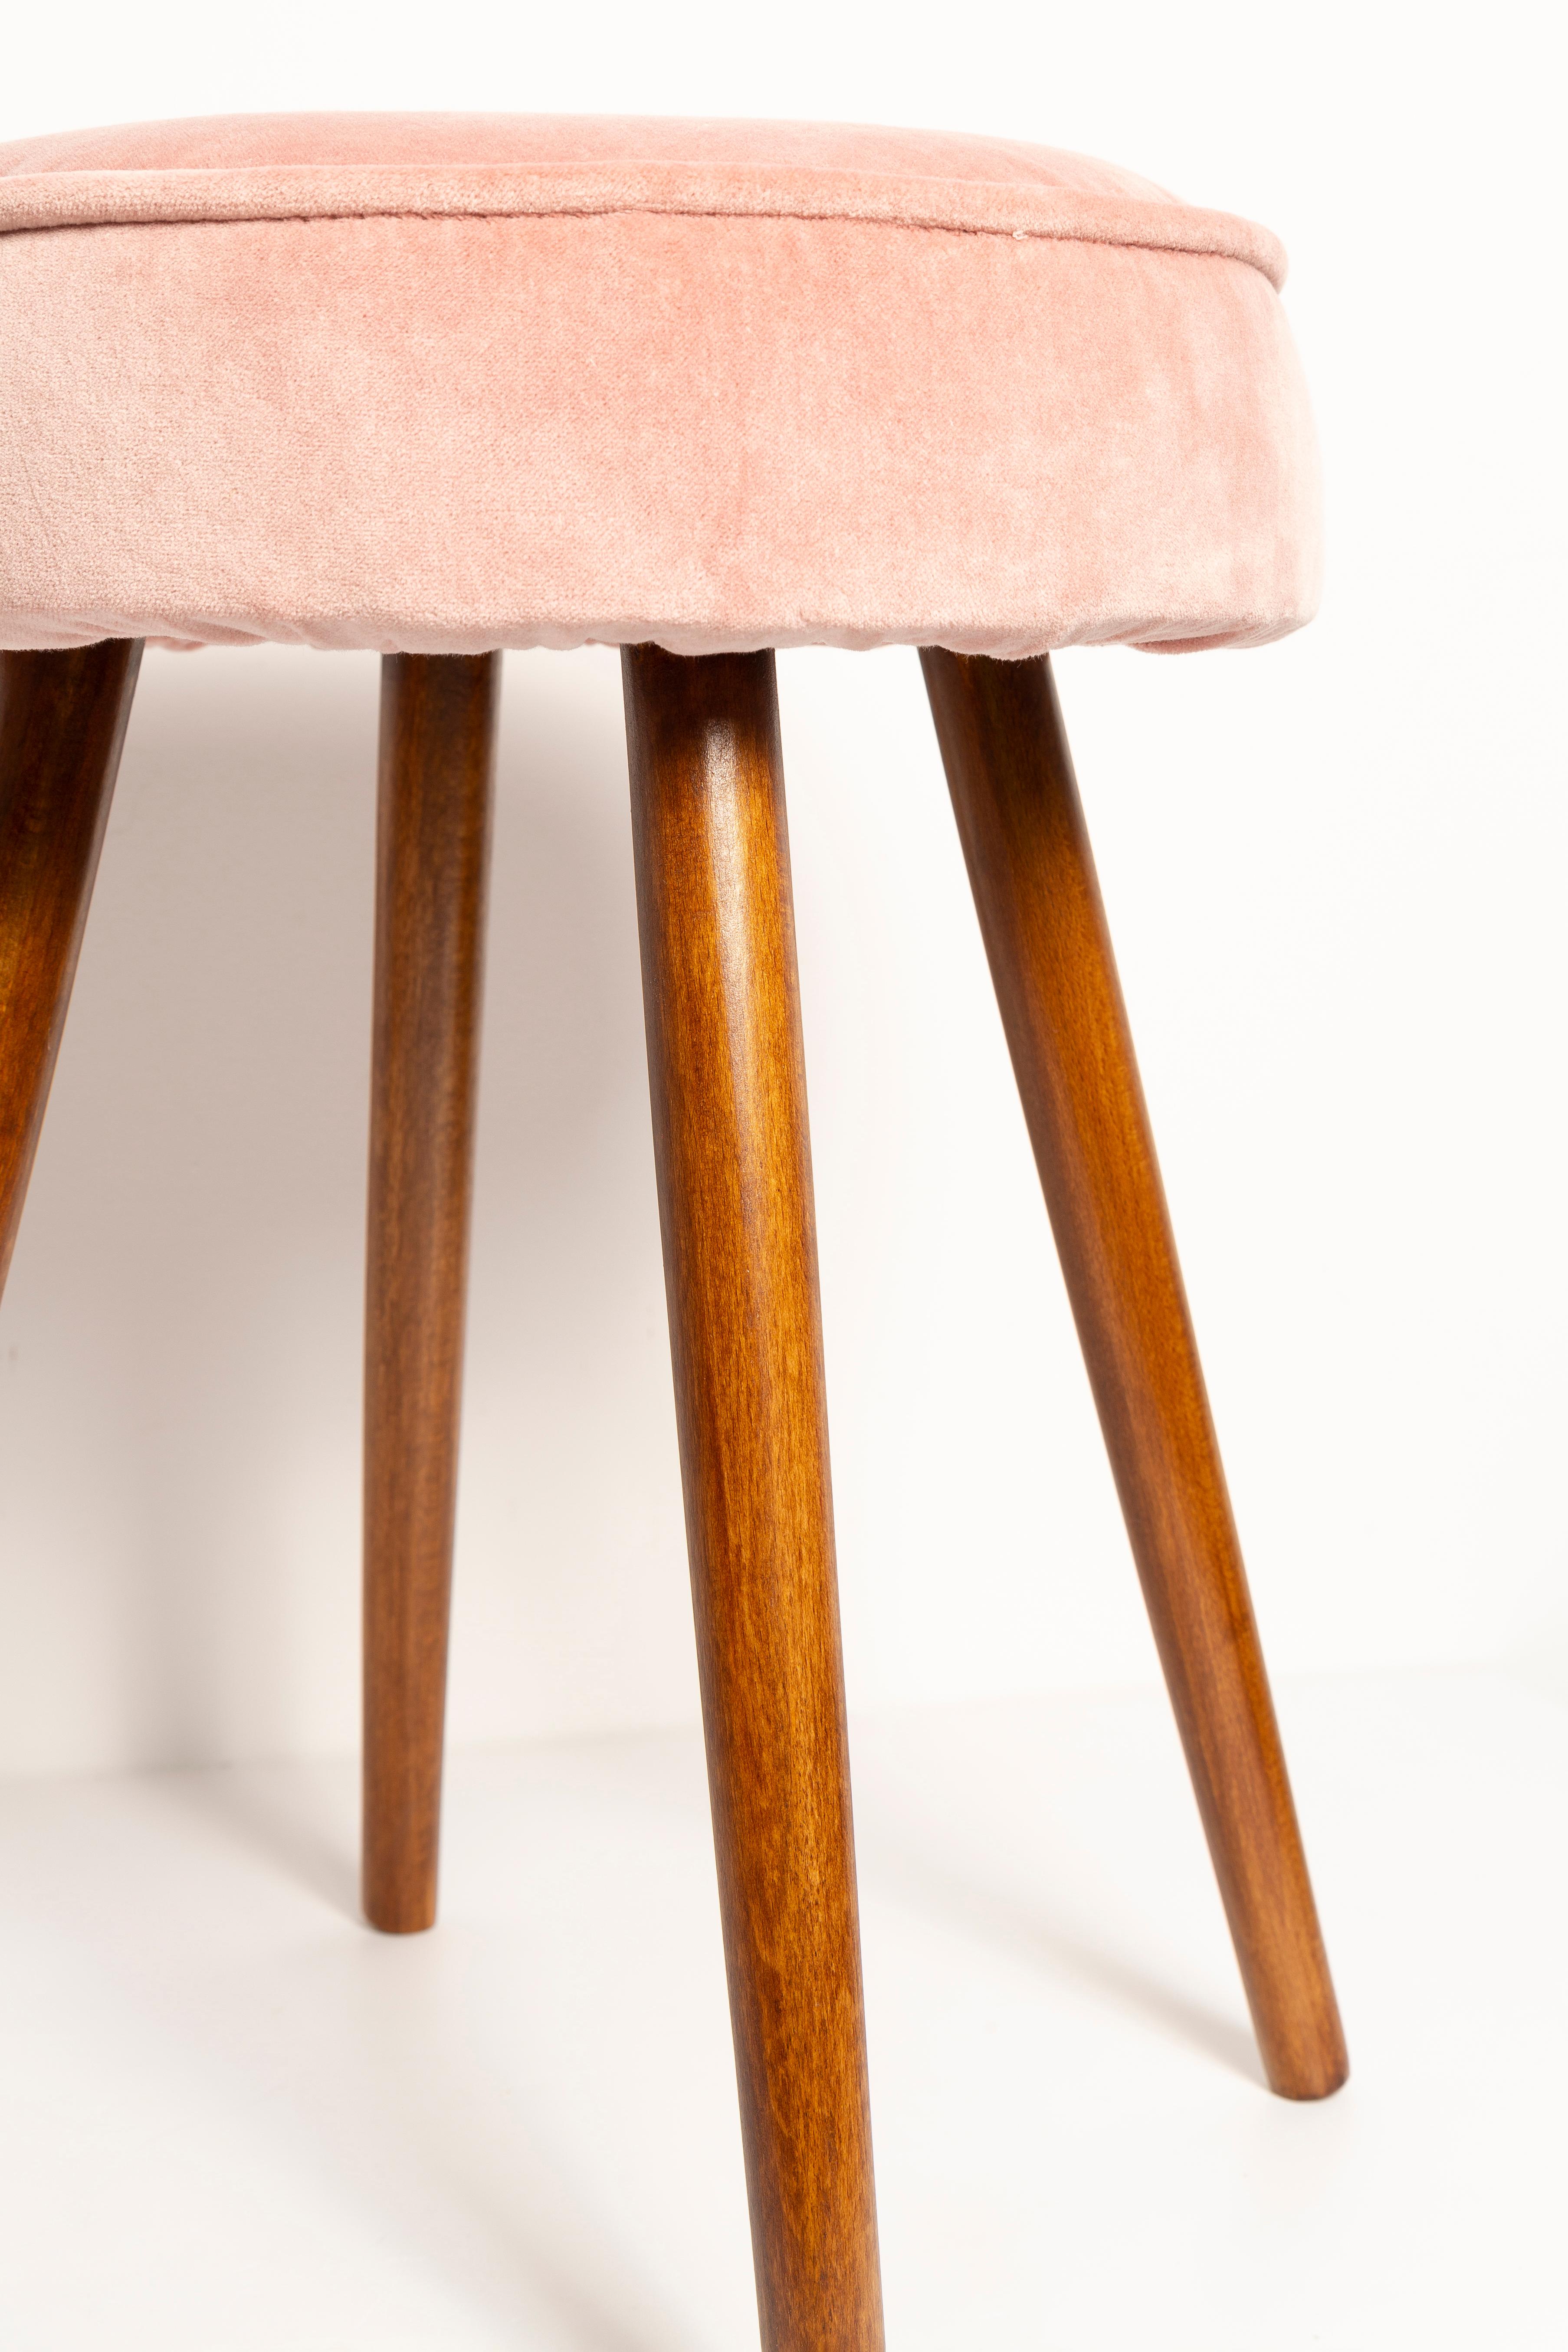 Hand-Crafted Mid Century Baby Pink Stool, Europe, 1960s For Sale